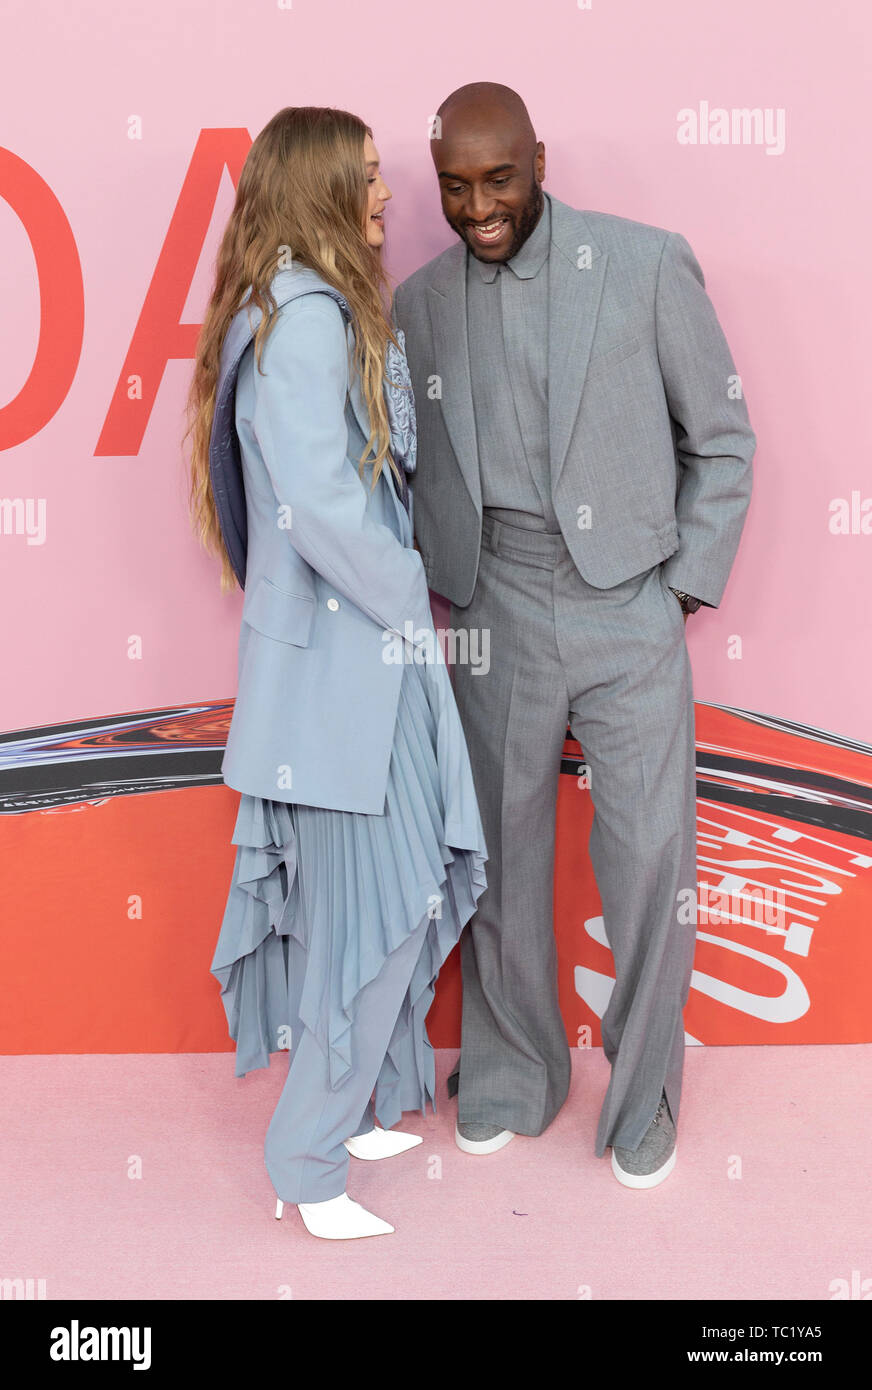 Gigi Hadid wearing dress by Off-White and Virgil Abloh attend 2019